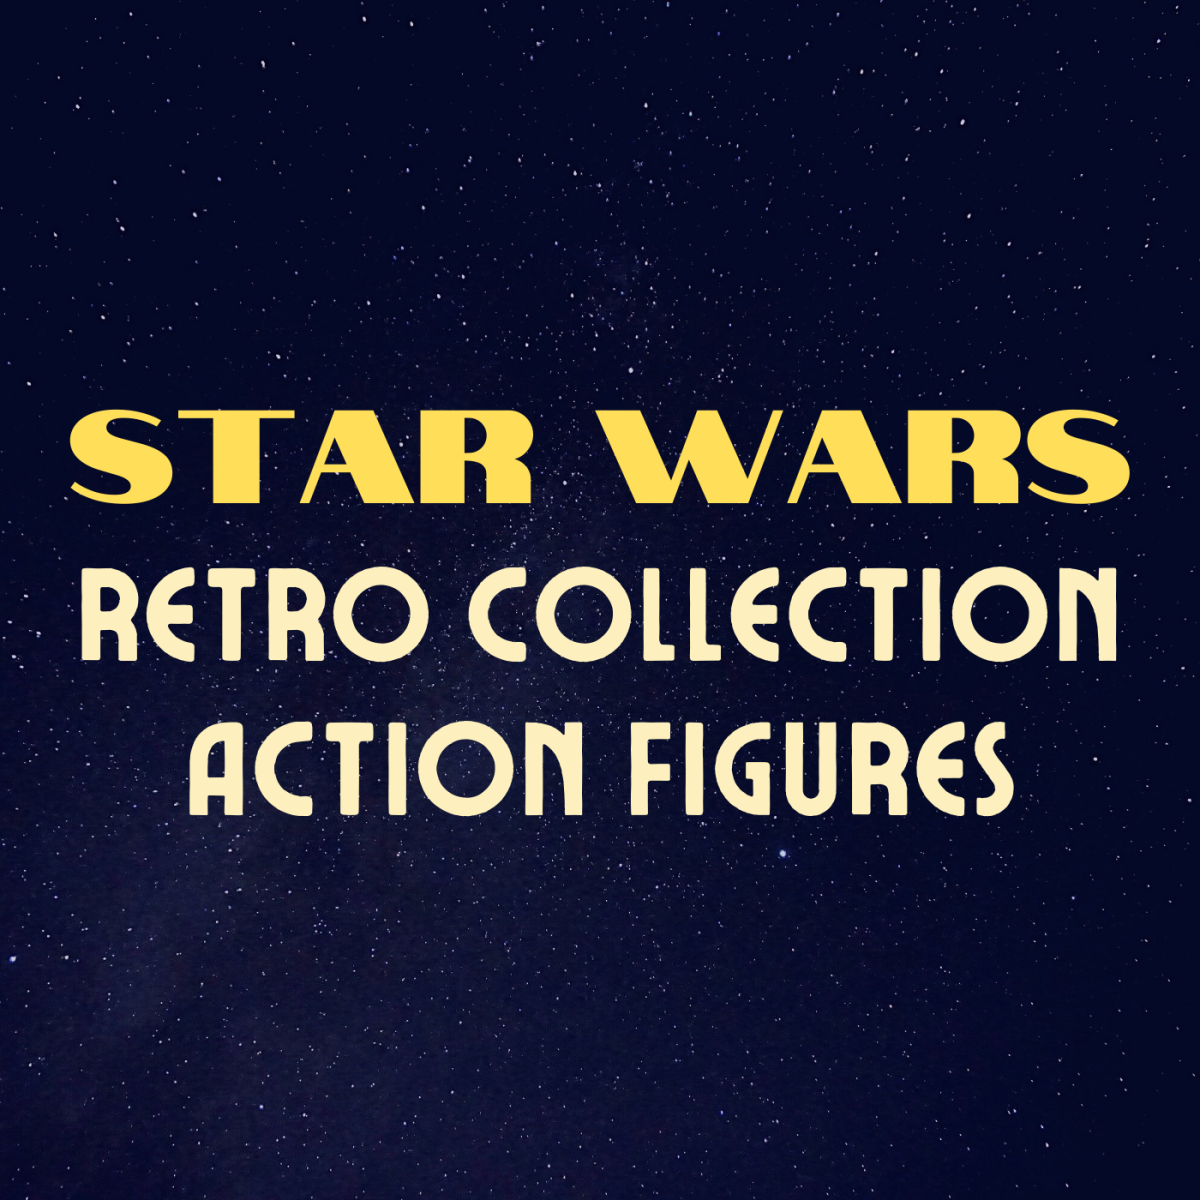 Explore Hasbro's Retro Collection of Star Wars figurines, including what figures are available and how much they're worth.